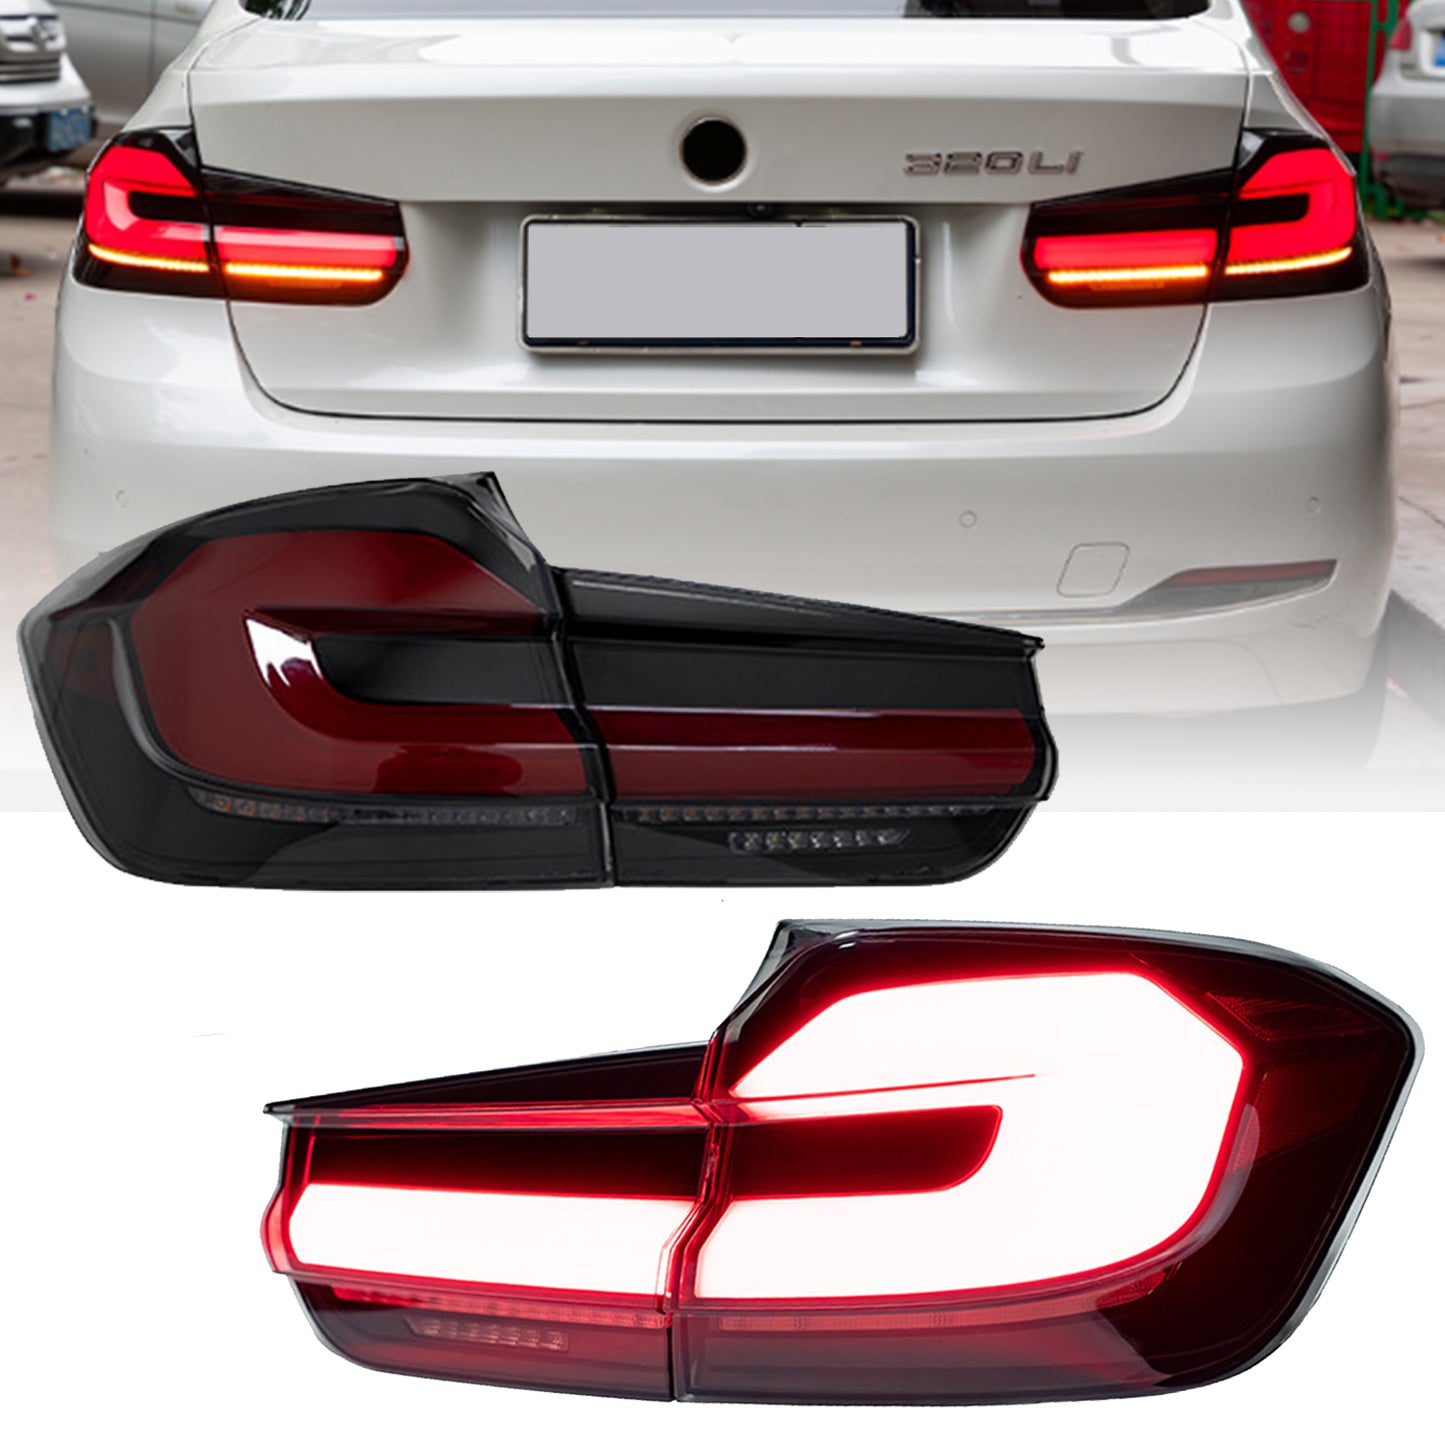 Full LED Tail Lights Assembly For BMW 3 Series F30 F35 2013-2018(New 5-Series style)